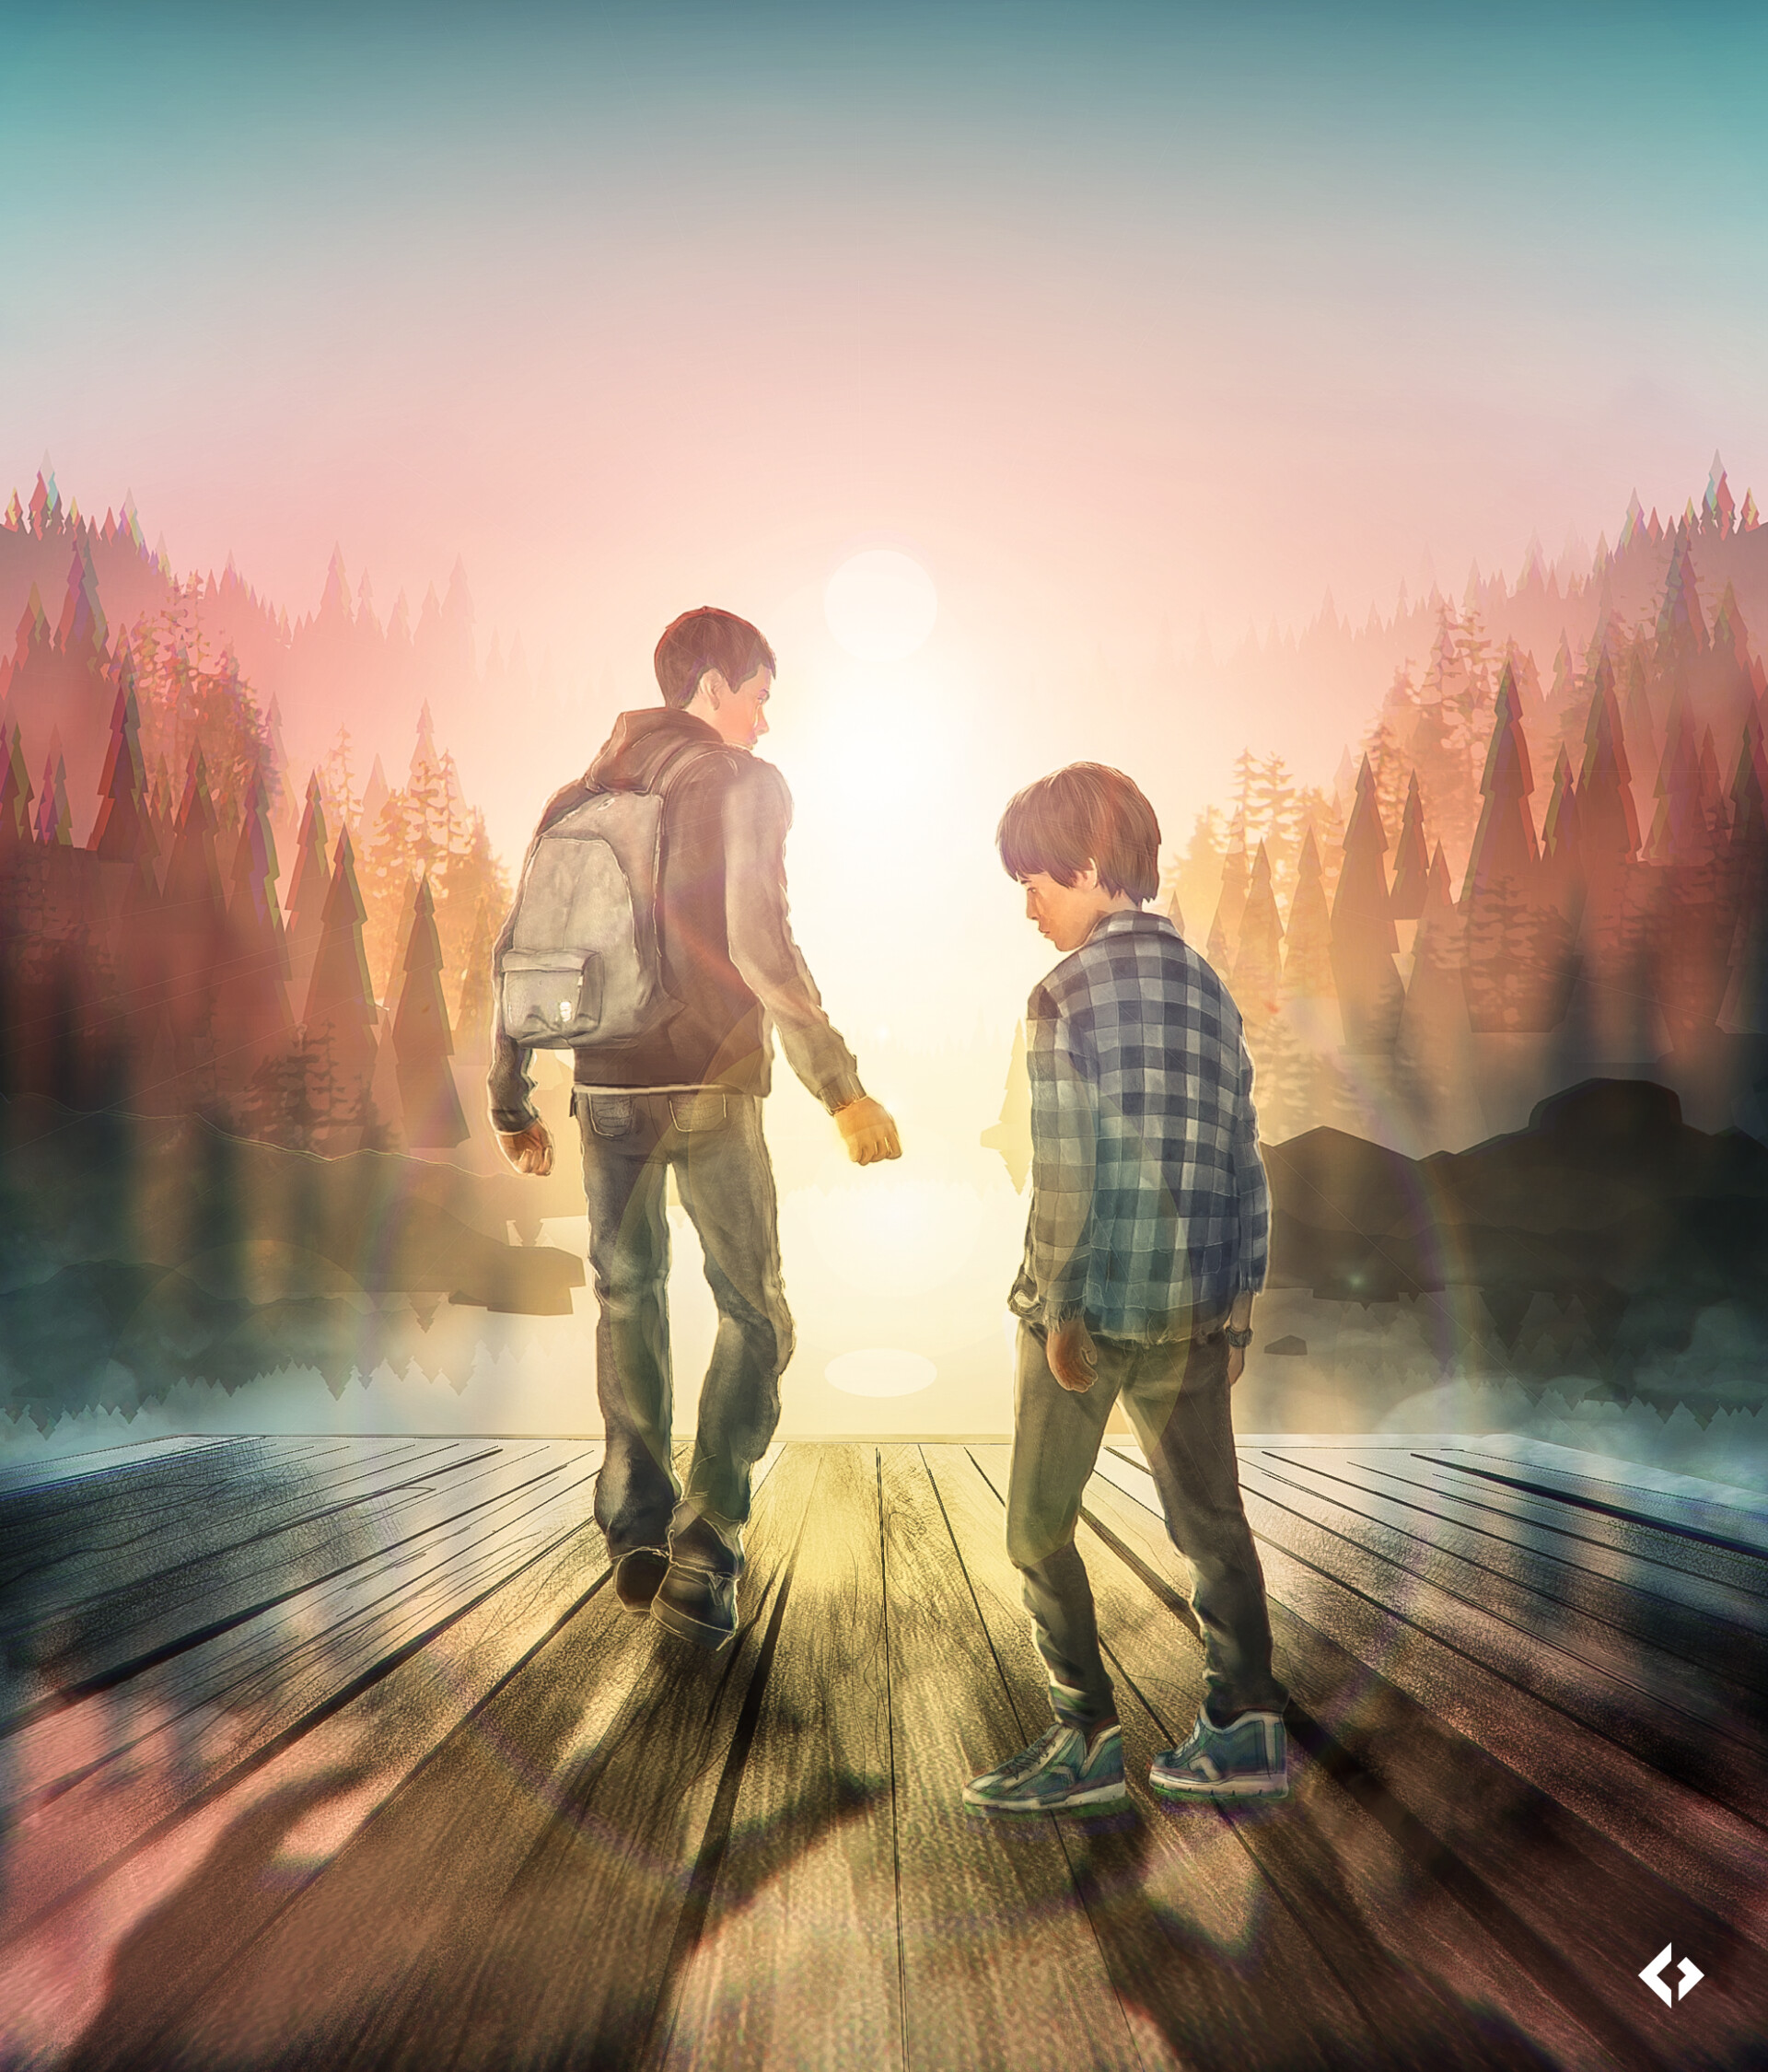 This is the life special version. Life is Strange 2. Life is Strange 2 Постер. Life is Strange 2 обложка. Life is Strange 2 дорога.